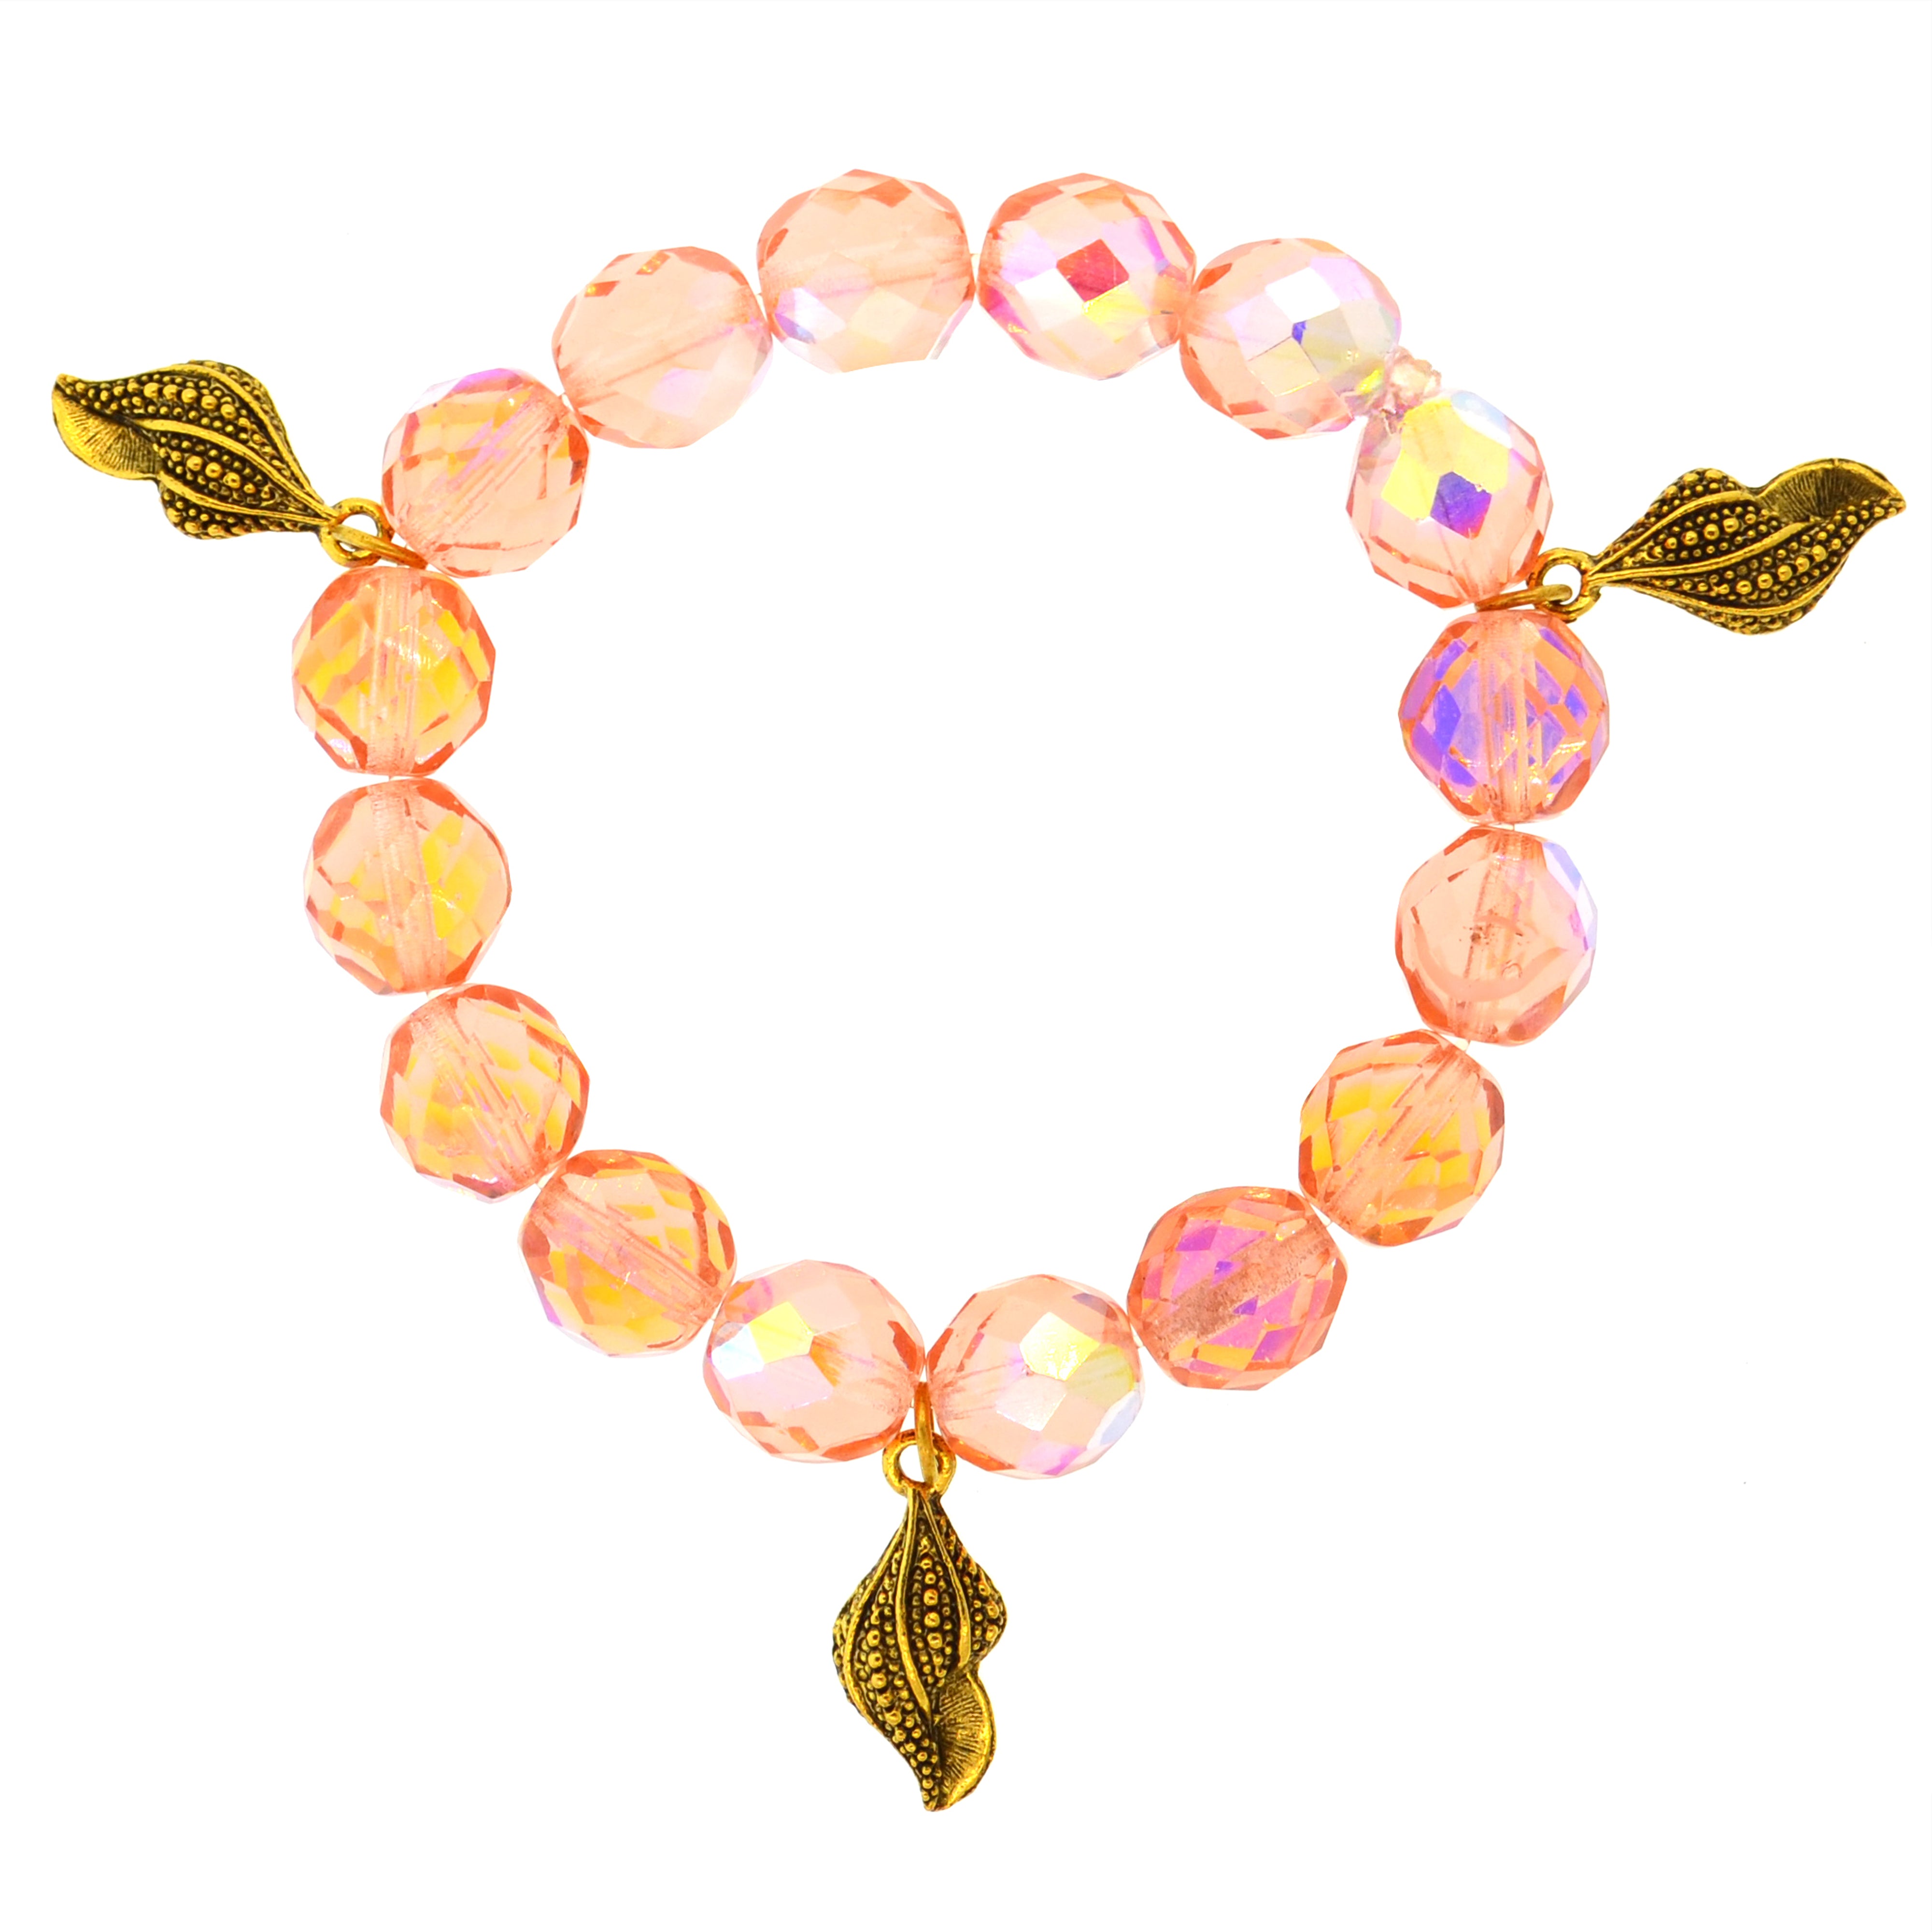 Iridescent Rose Peach Galapagos Conch Shell Bracelet